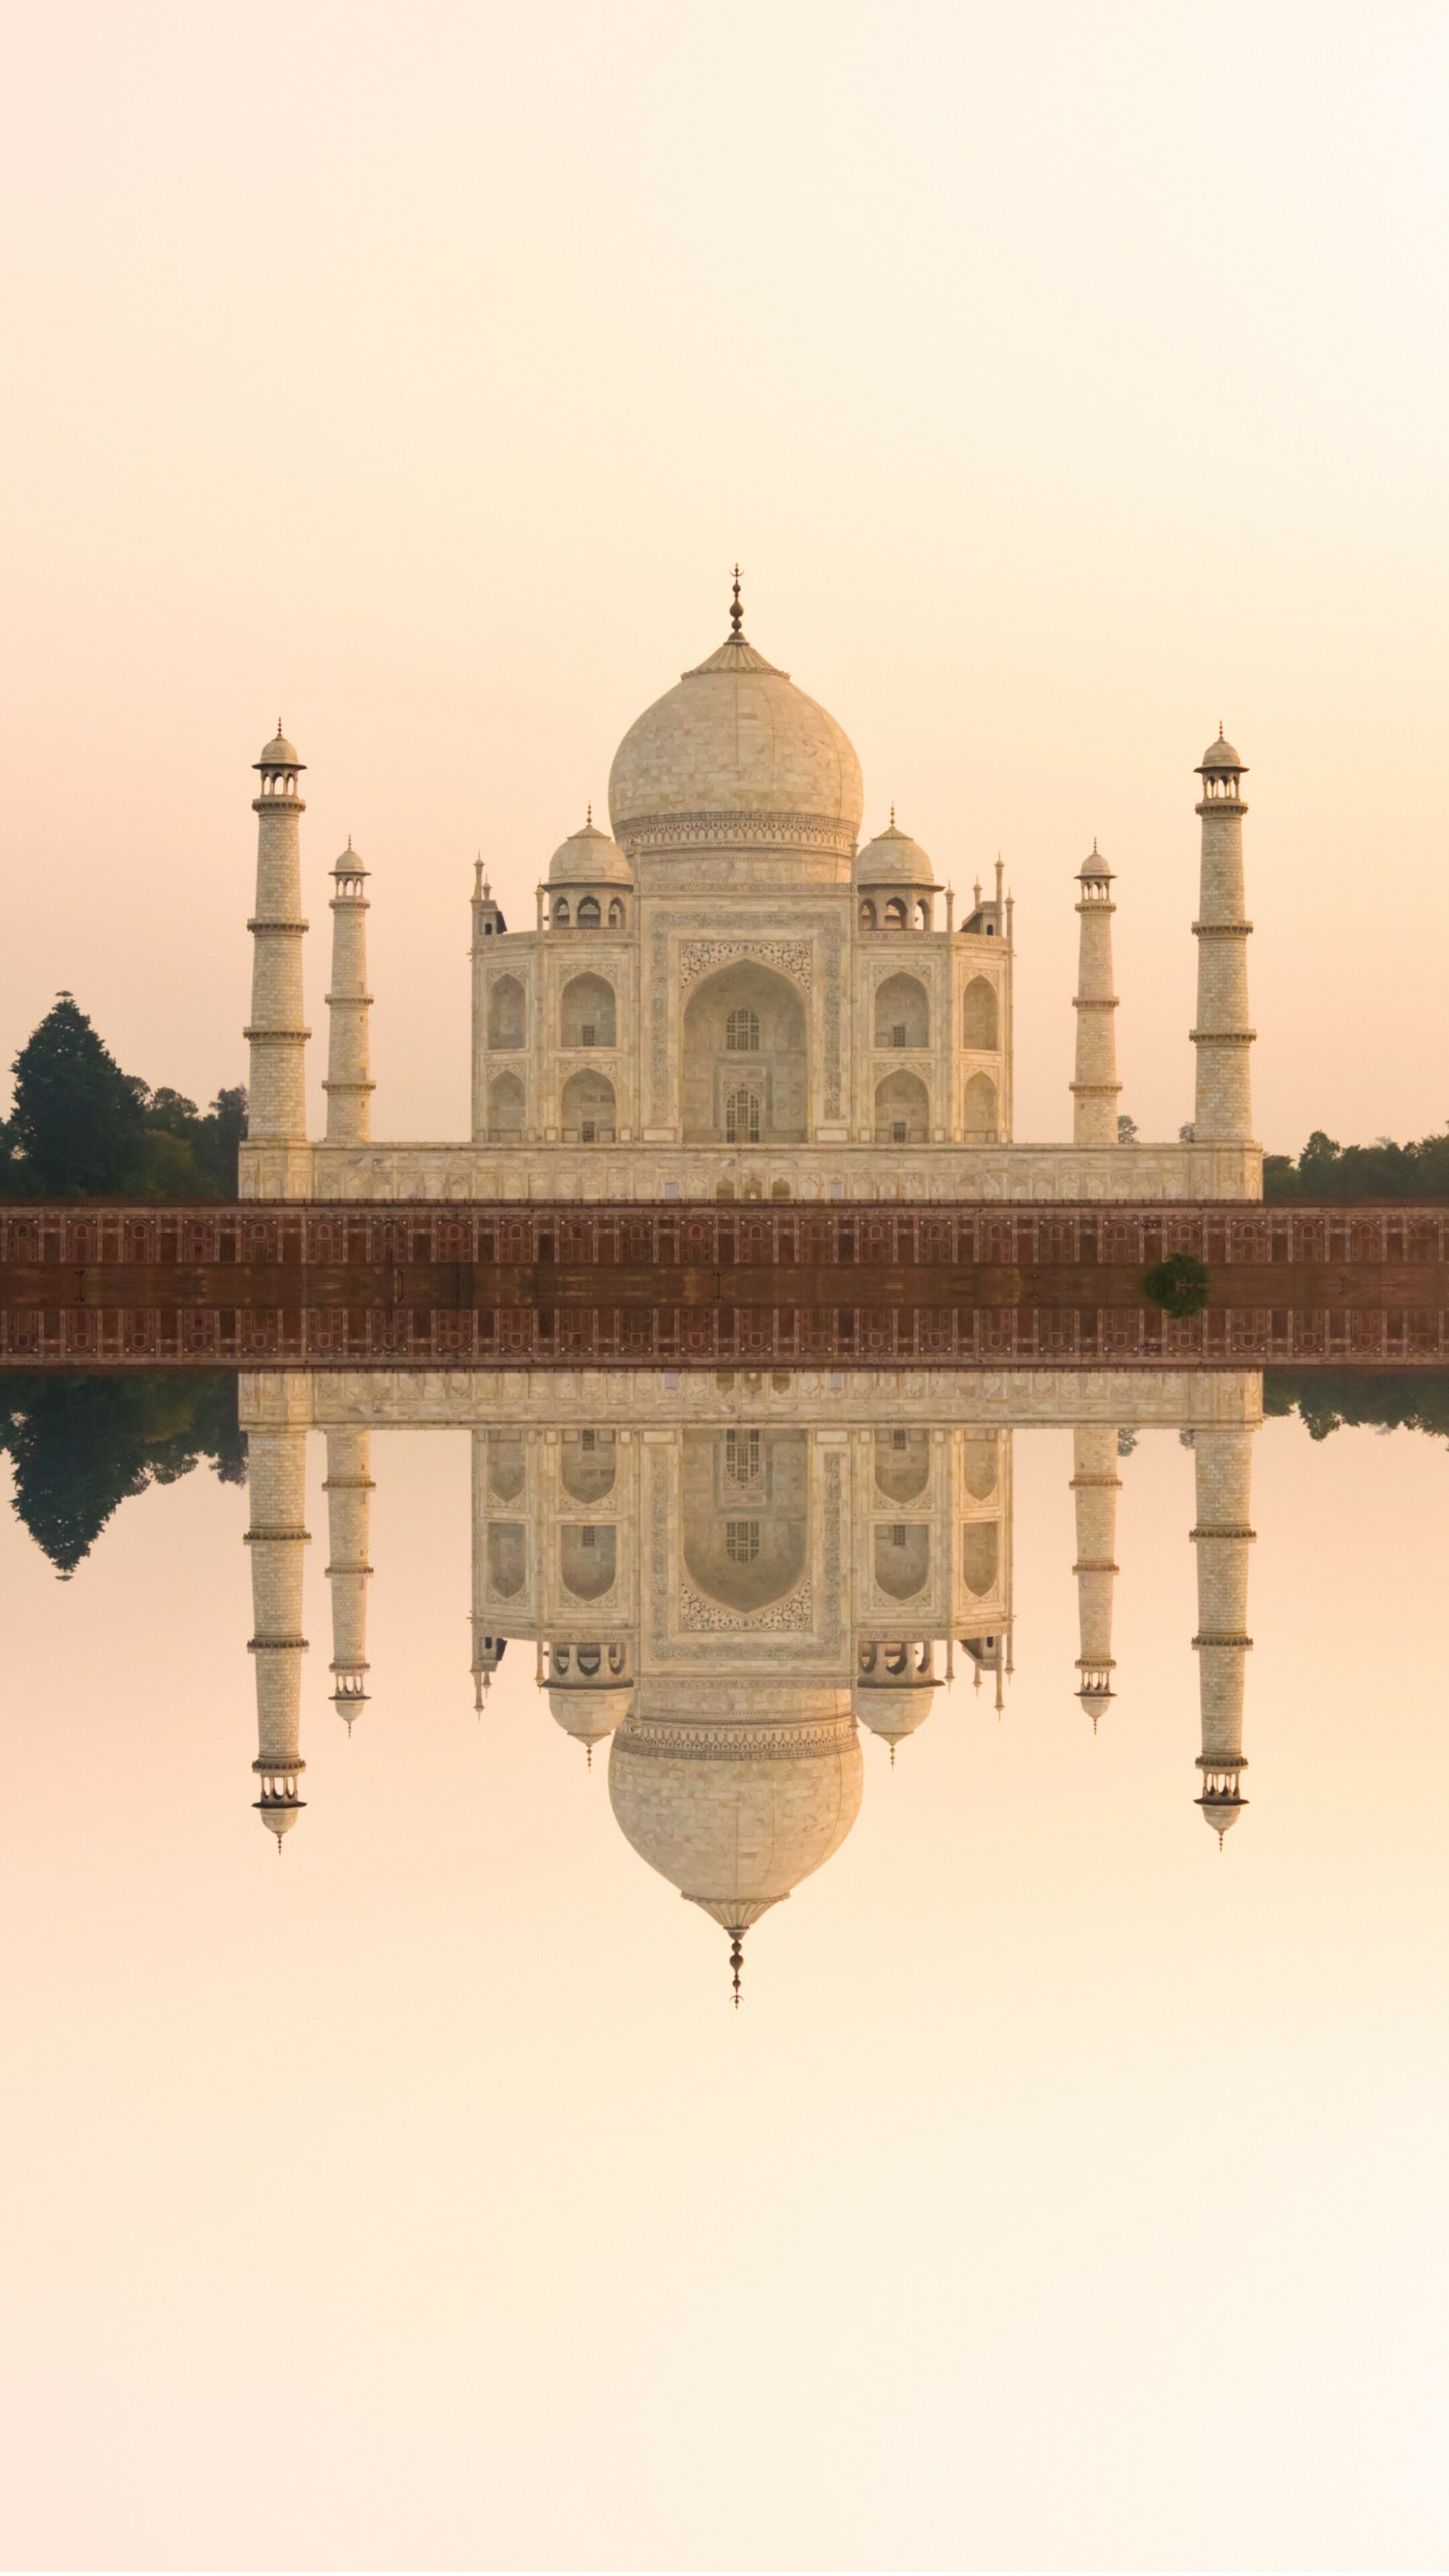 India: An immense mausoleum of white marble, built in Agra between 1631 and 1648. 2160x3840 4K Background.